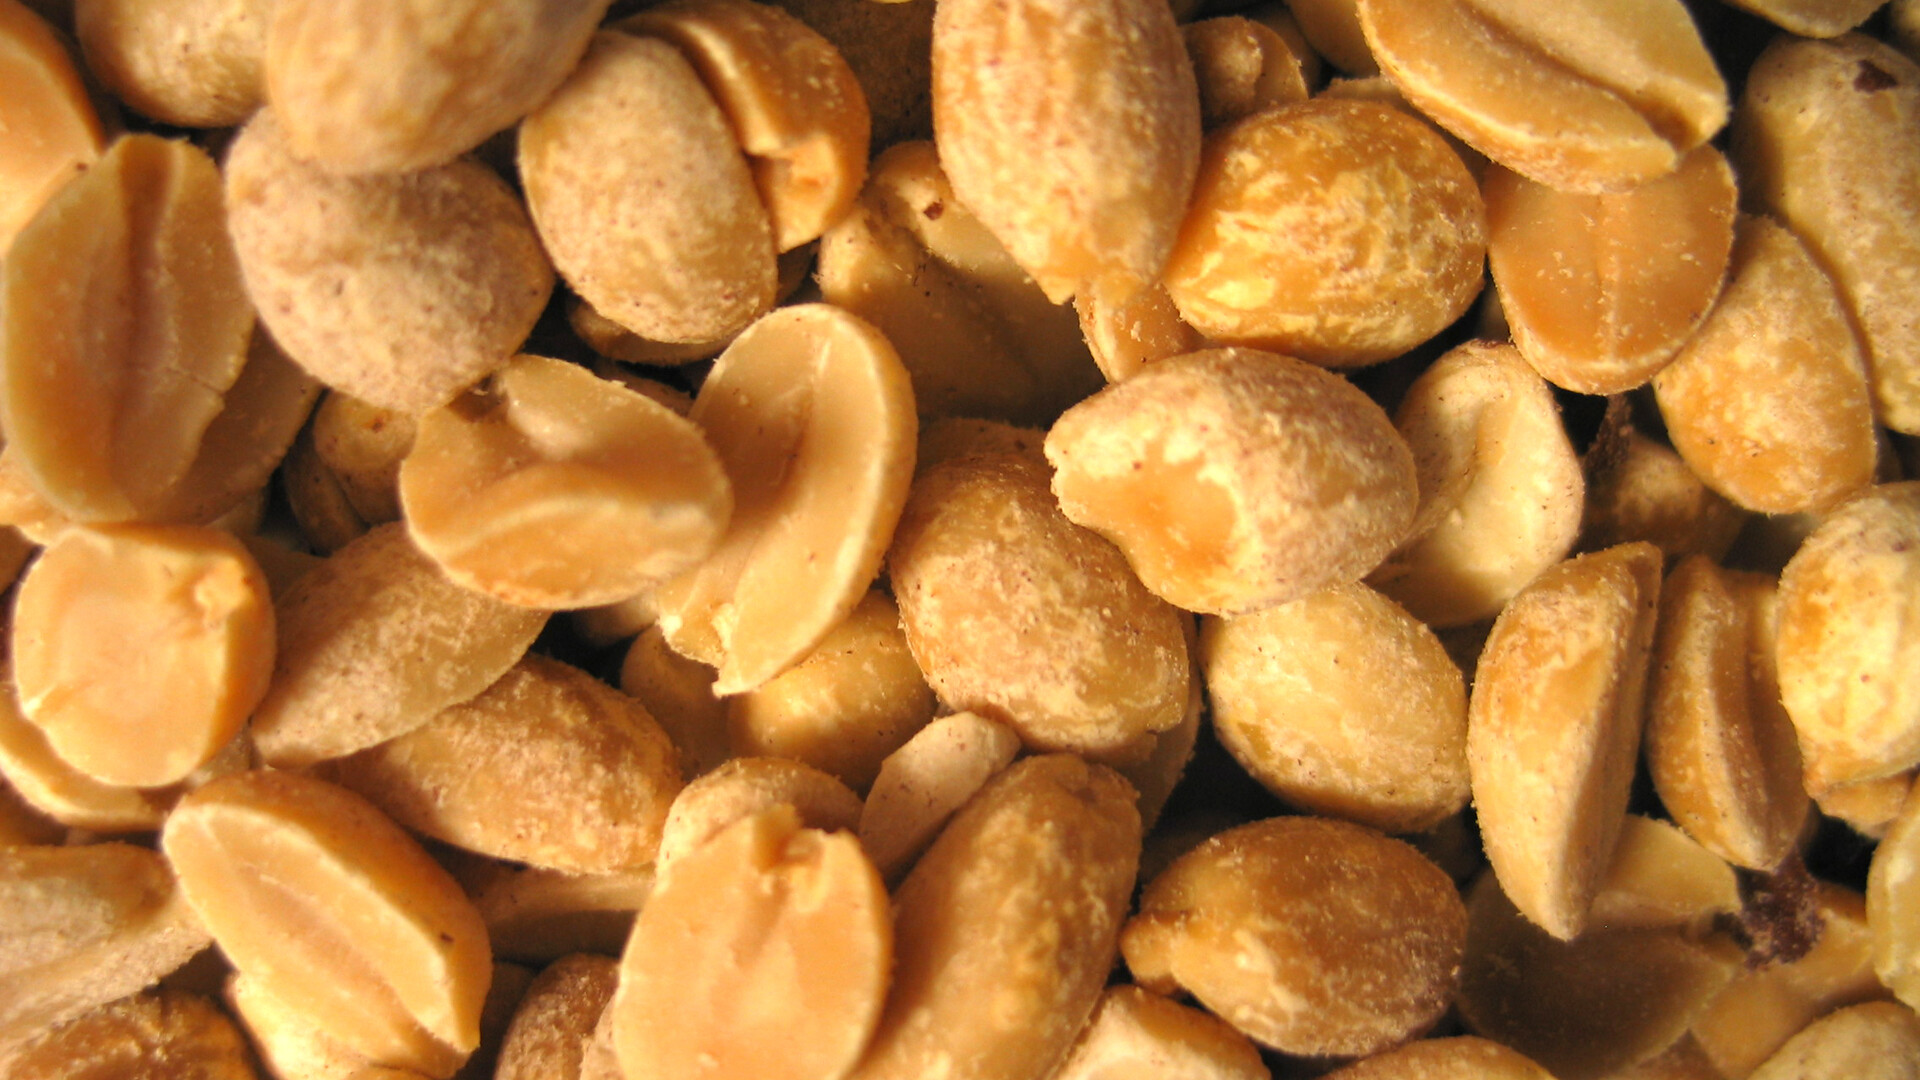 A Peanut Perspective on Sustainability